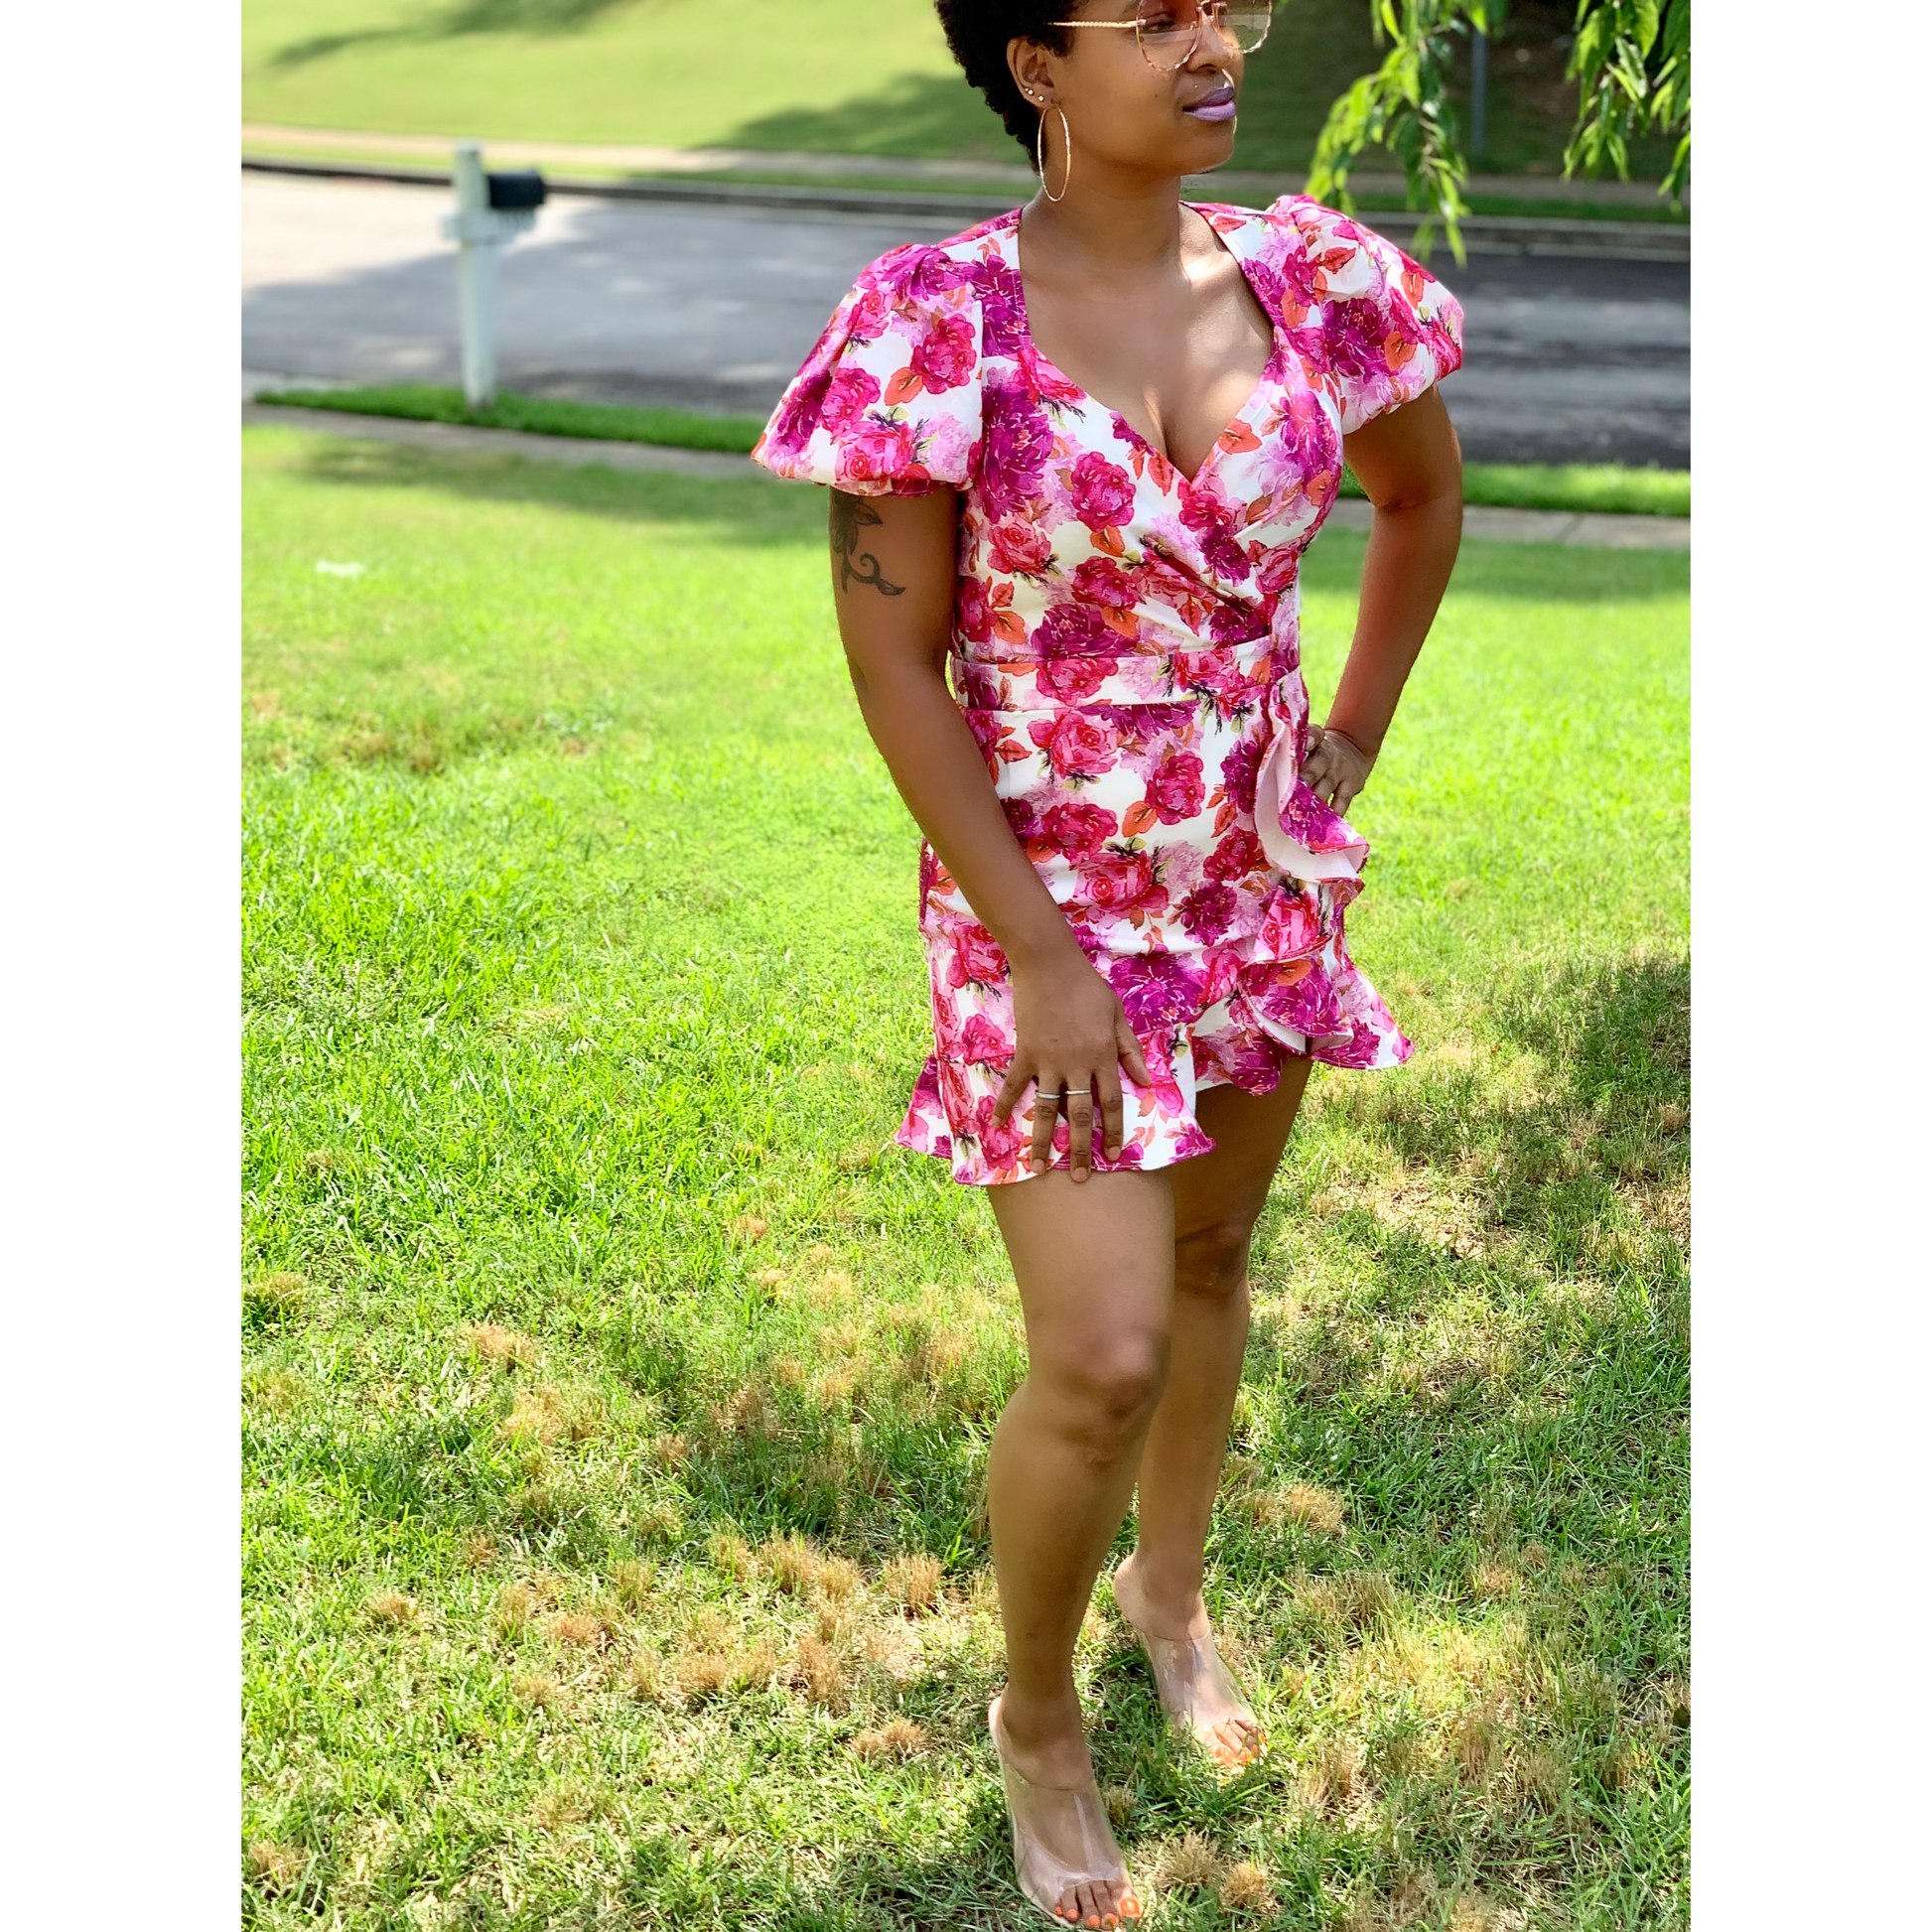 V-neck, surplice, short puff sleeve, mini length, ruffle, zippered back, and all over floral prin